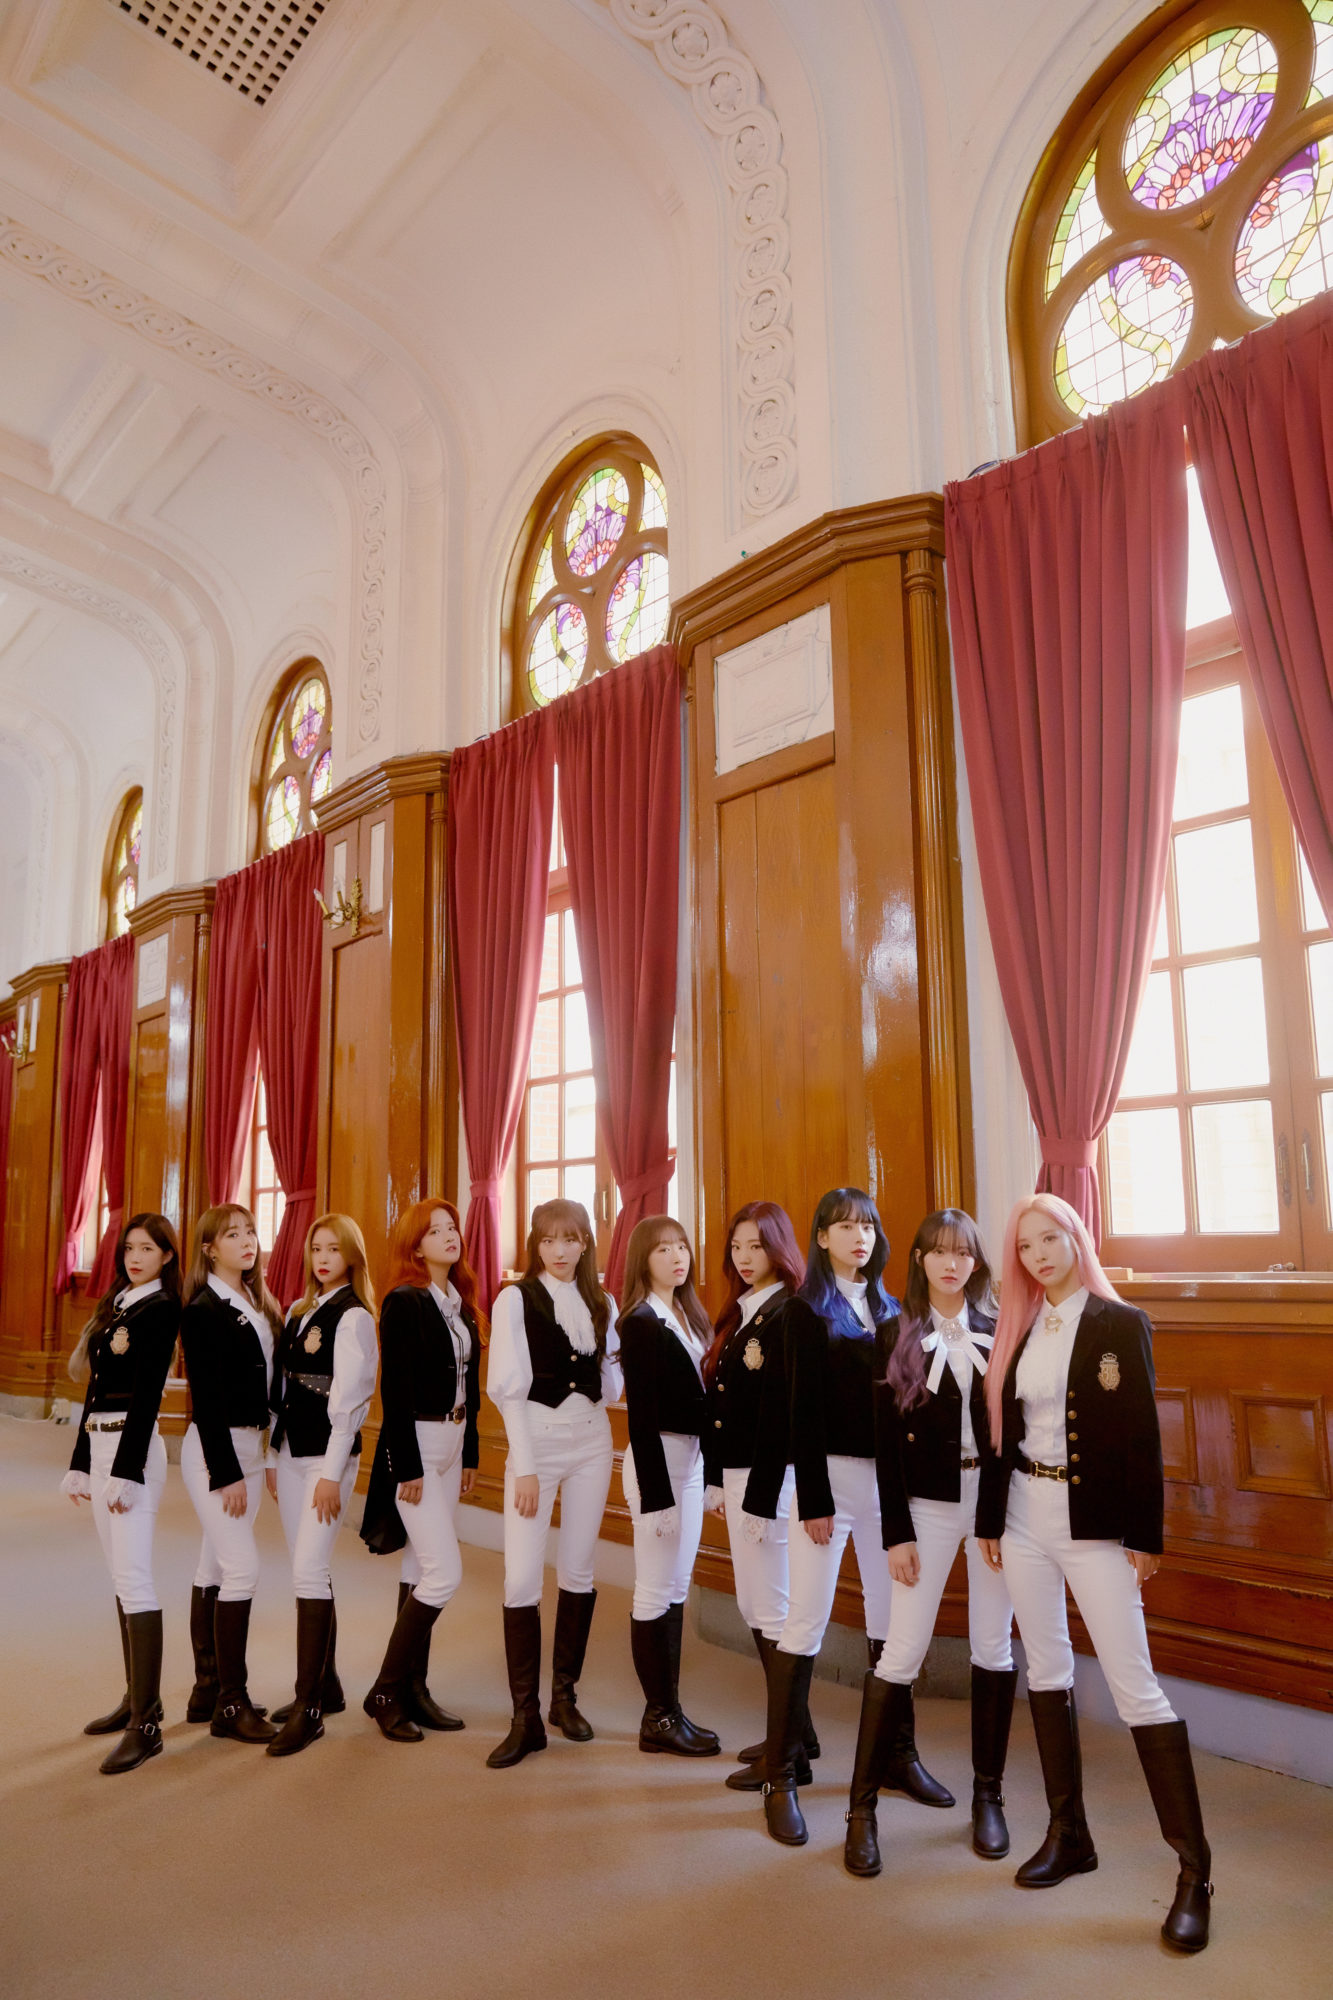 WJSN As You Wish Concept Group